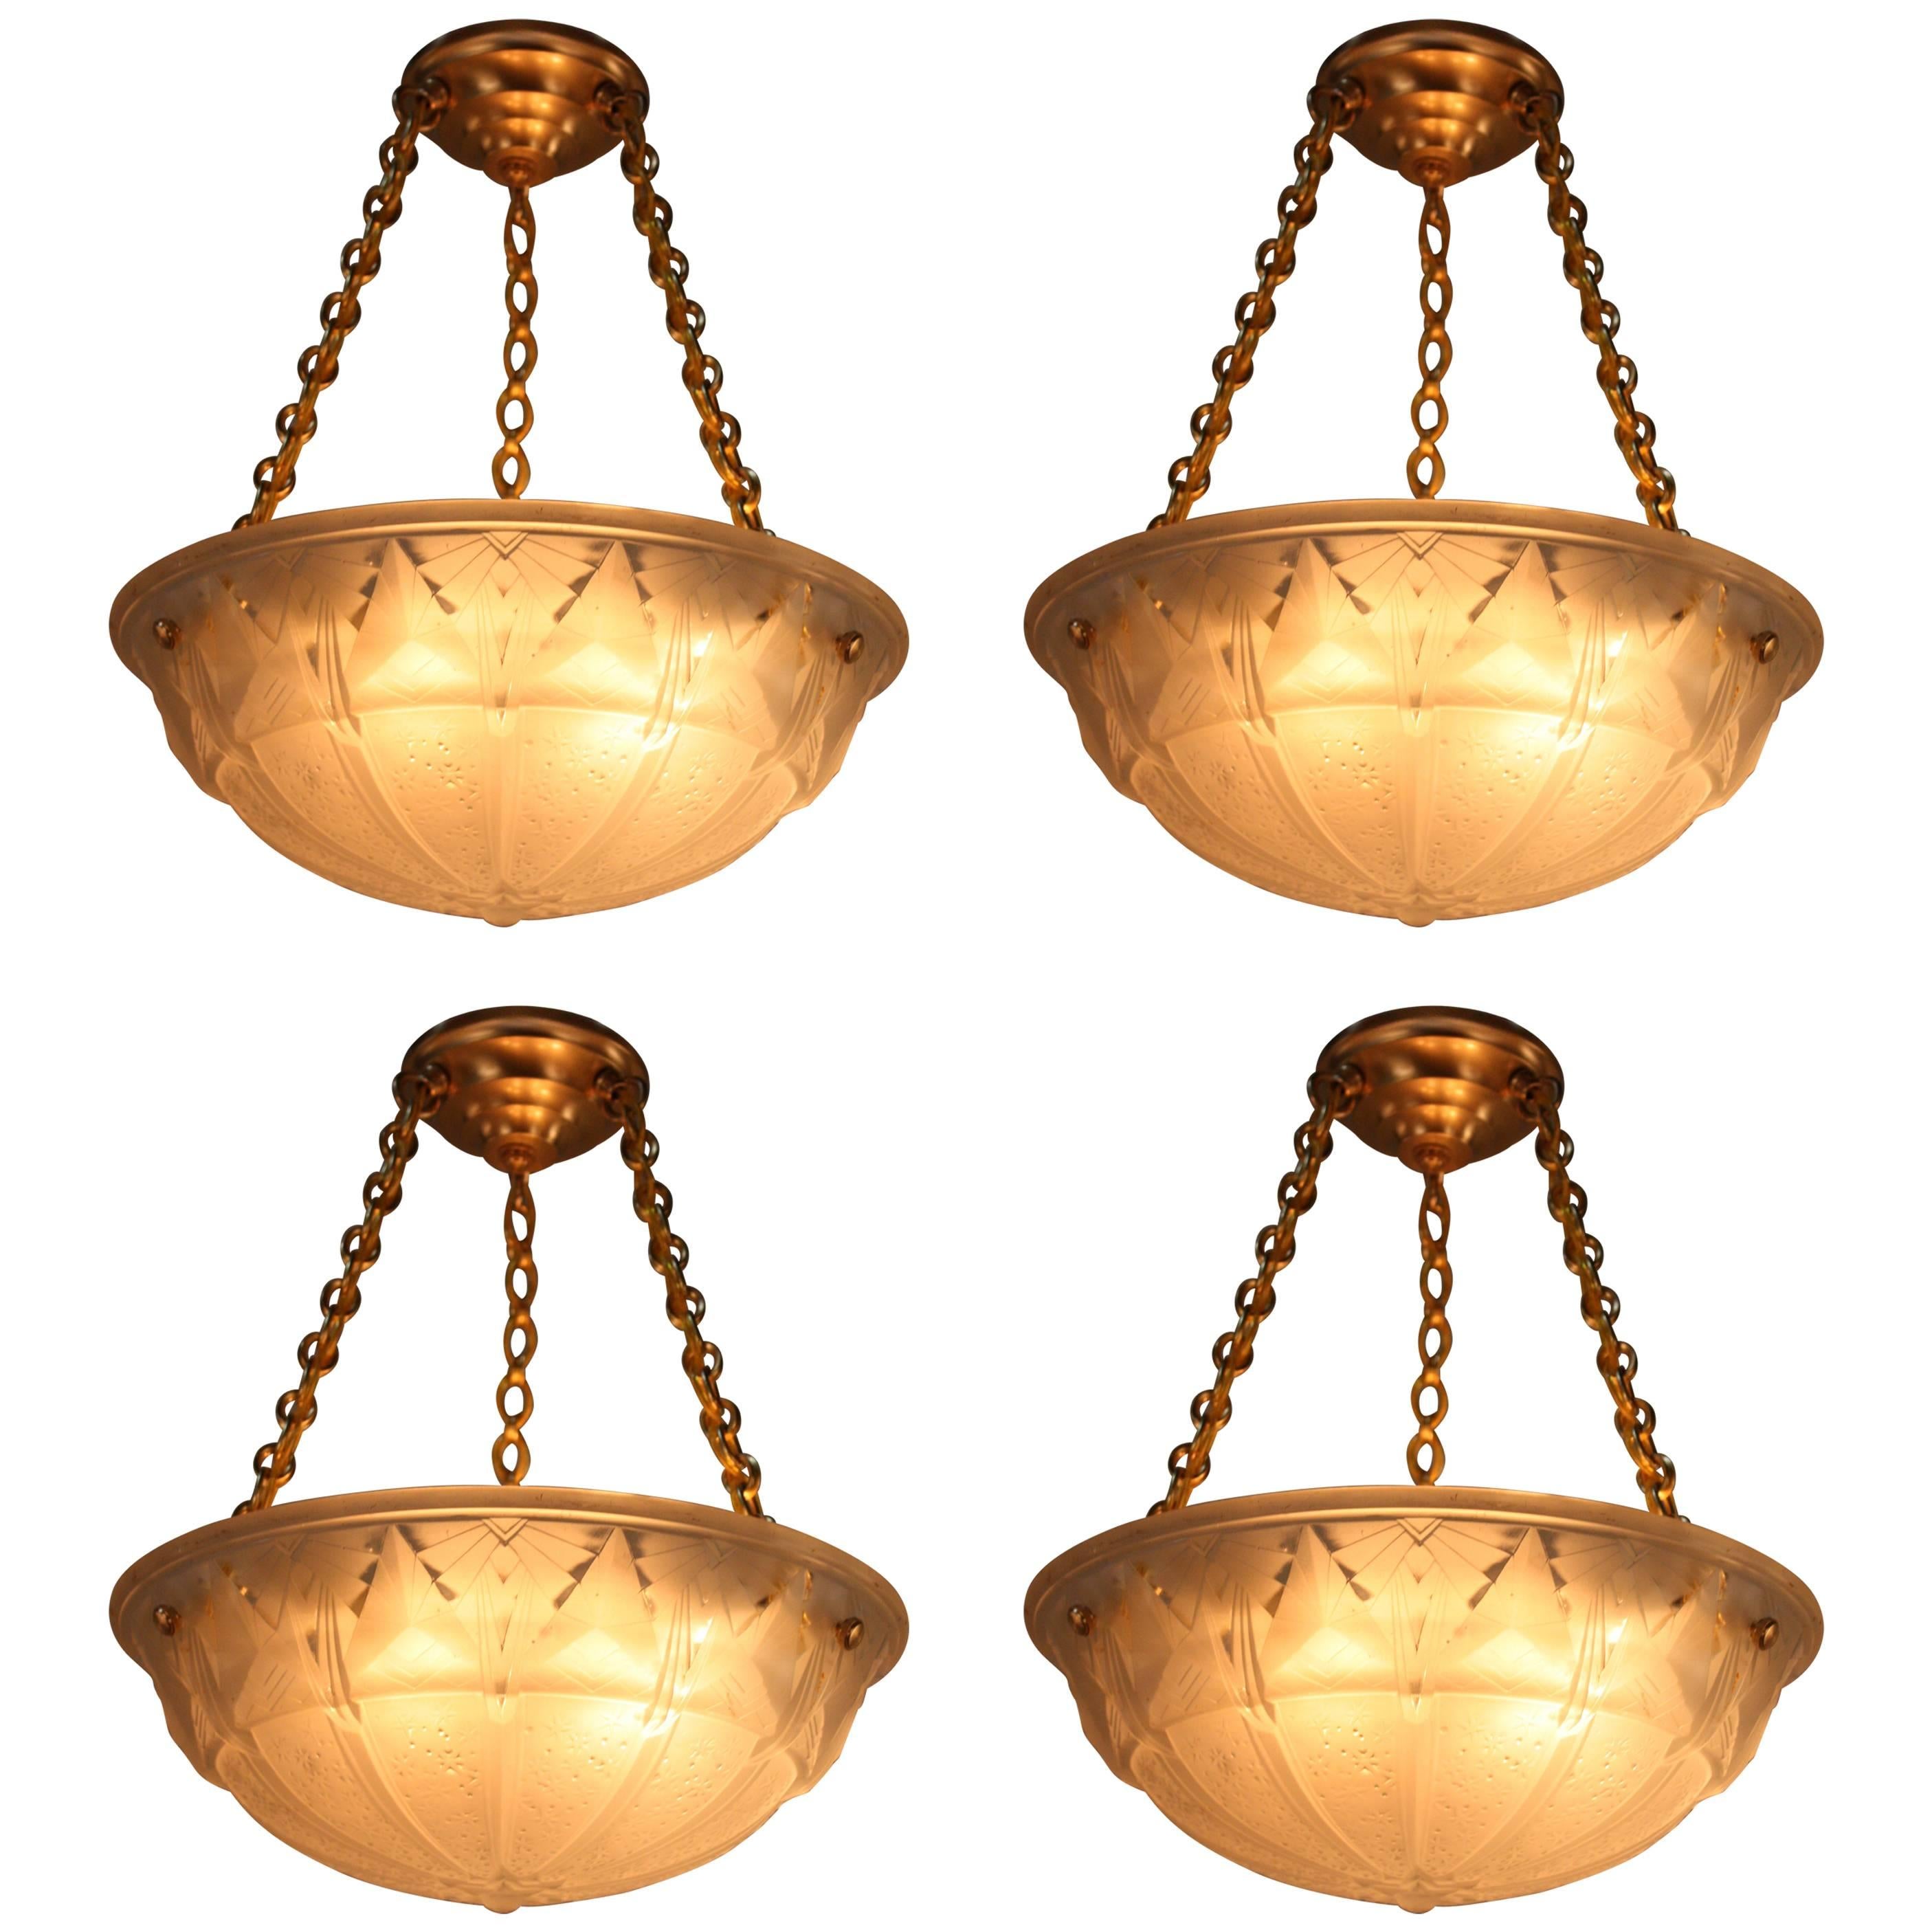 Set of Four Art Deco Chandeliers by Muller Freres